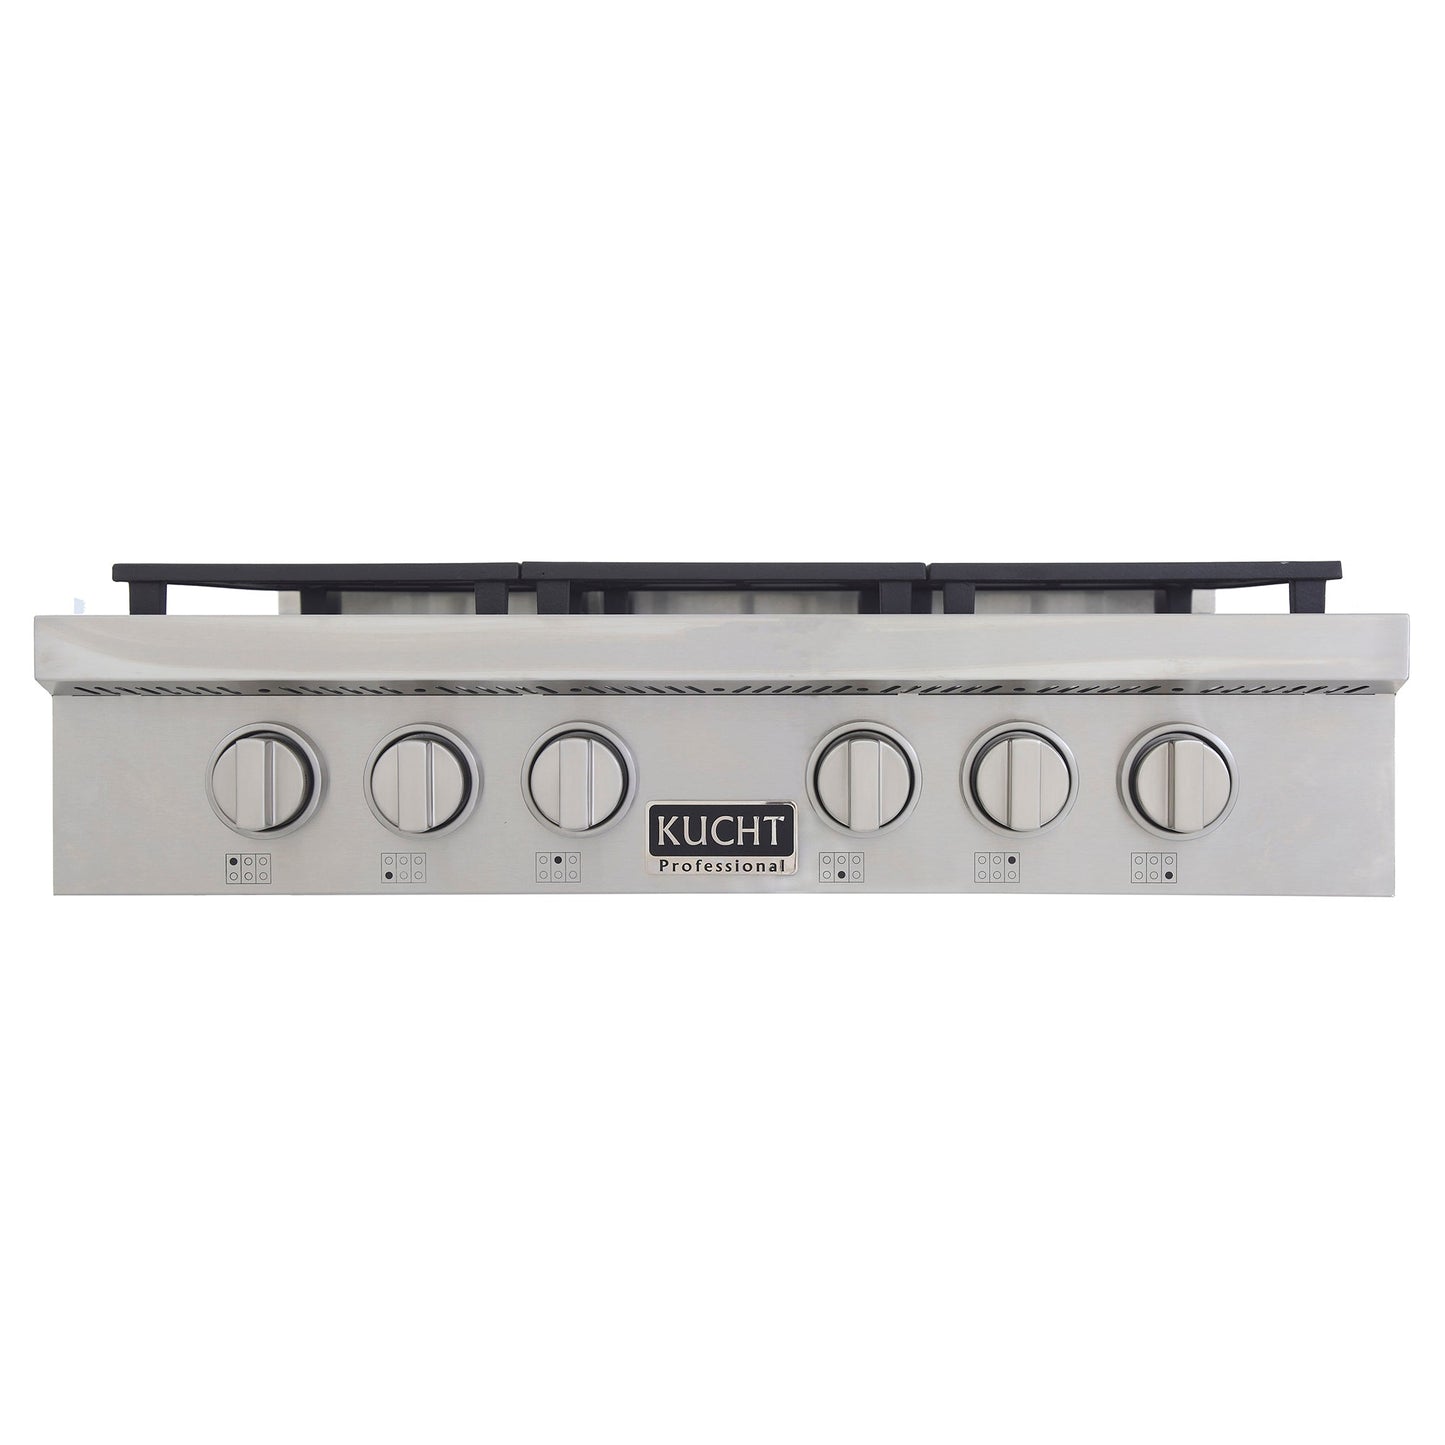 Kucht KFX Series 36" Propane Gas Range-Top With 6 Burners and Classic Silver Knobs